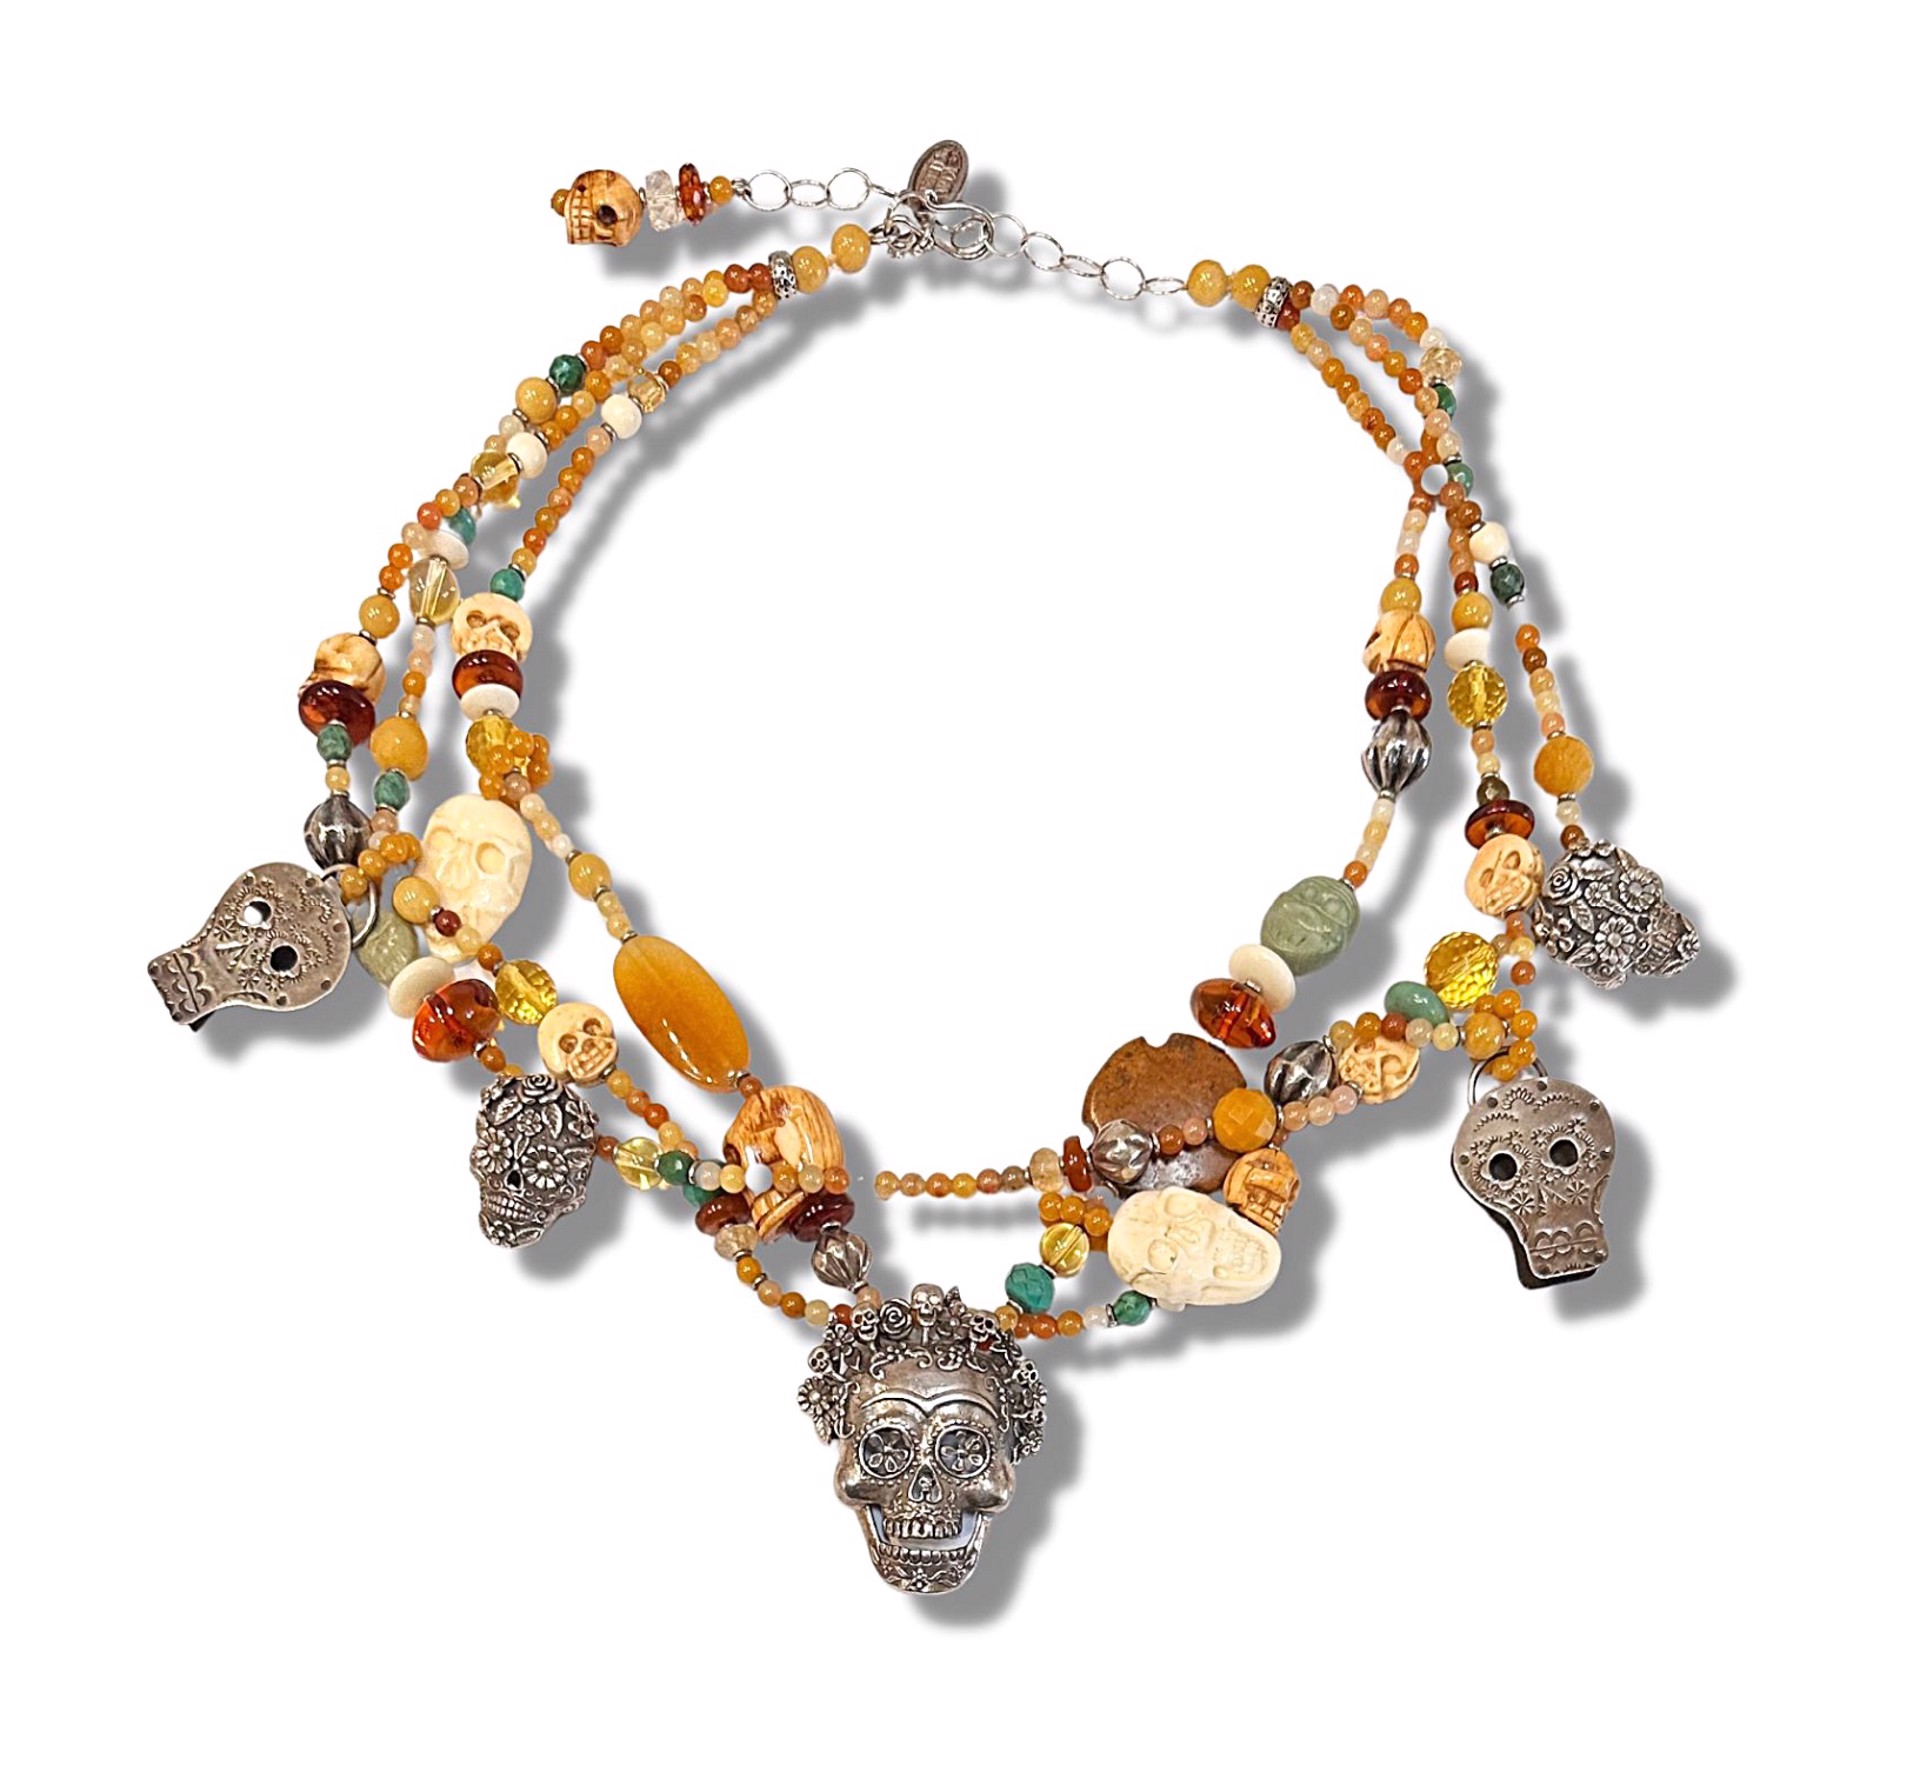 Necklace - 2 Strand Day of the Dead with Sterling Skull Charms #175 by Kim Yubeta